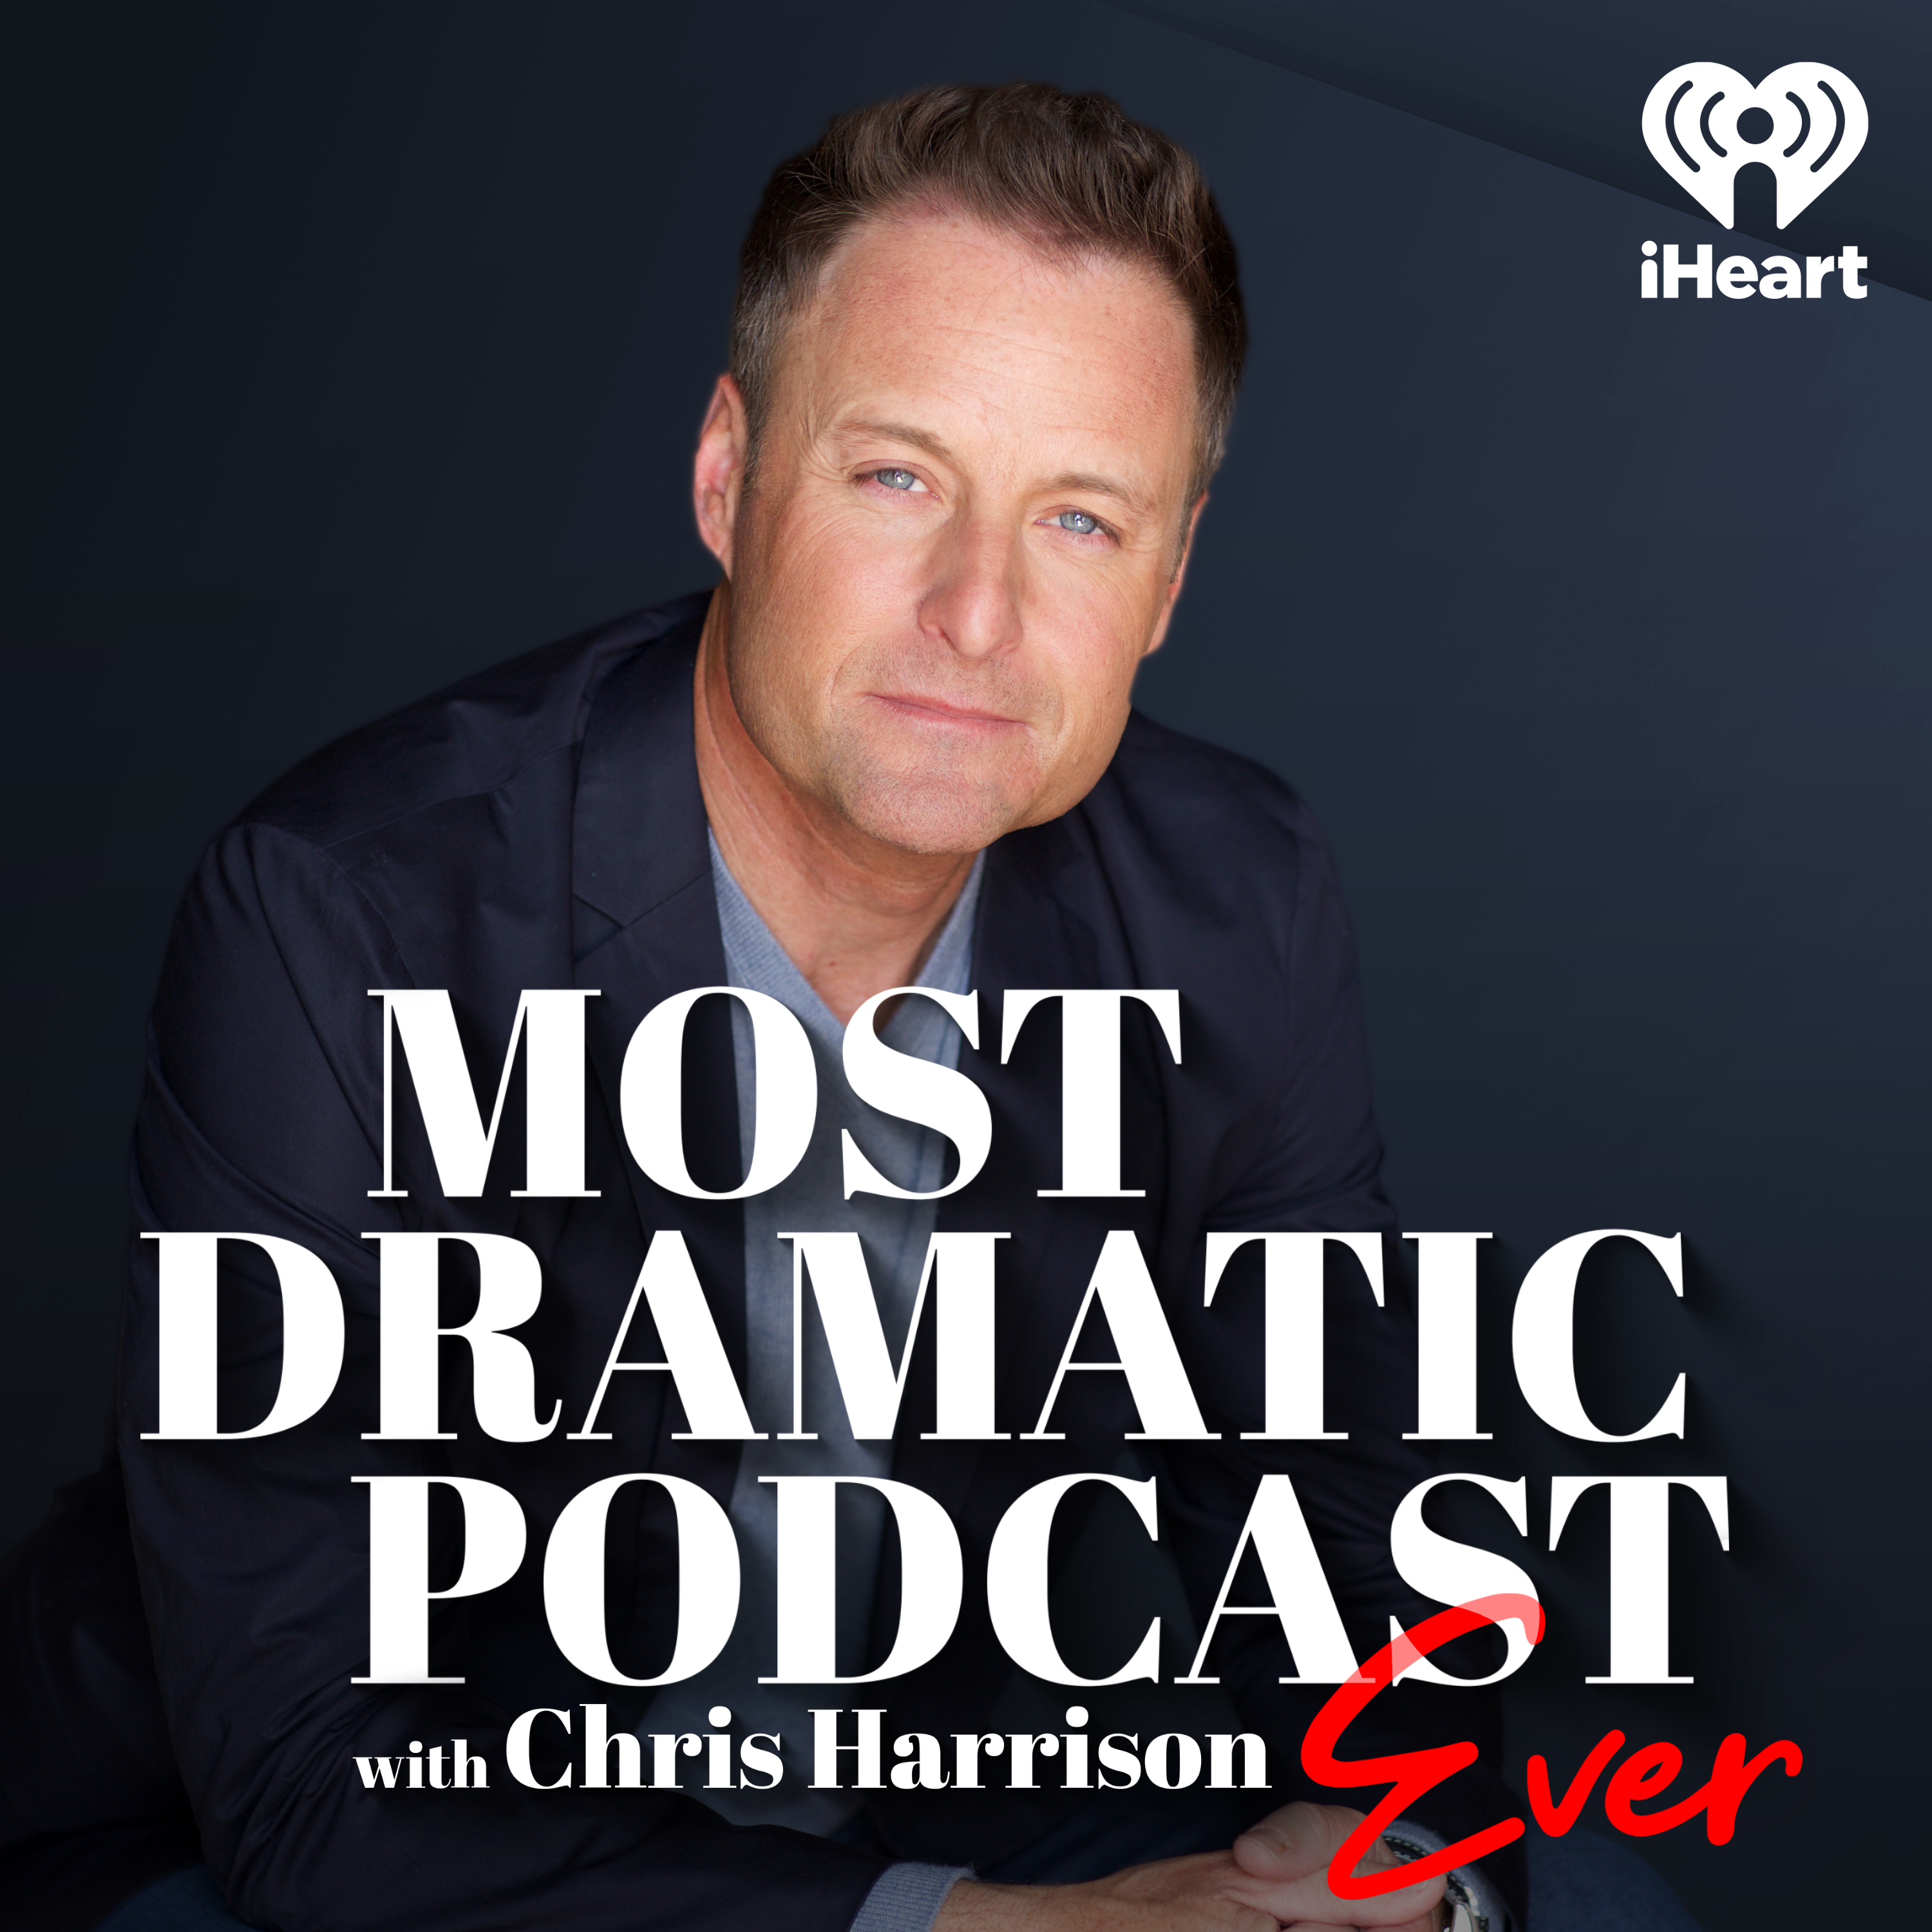 The Most Dramatic Podcast Ever with Chris Harrison podcast show image